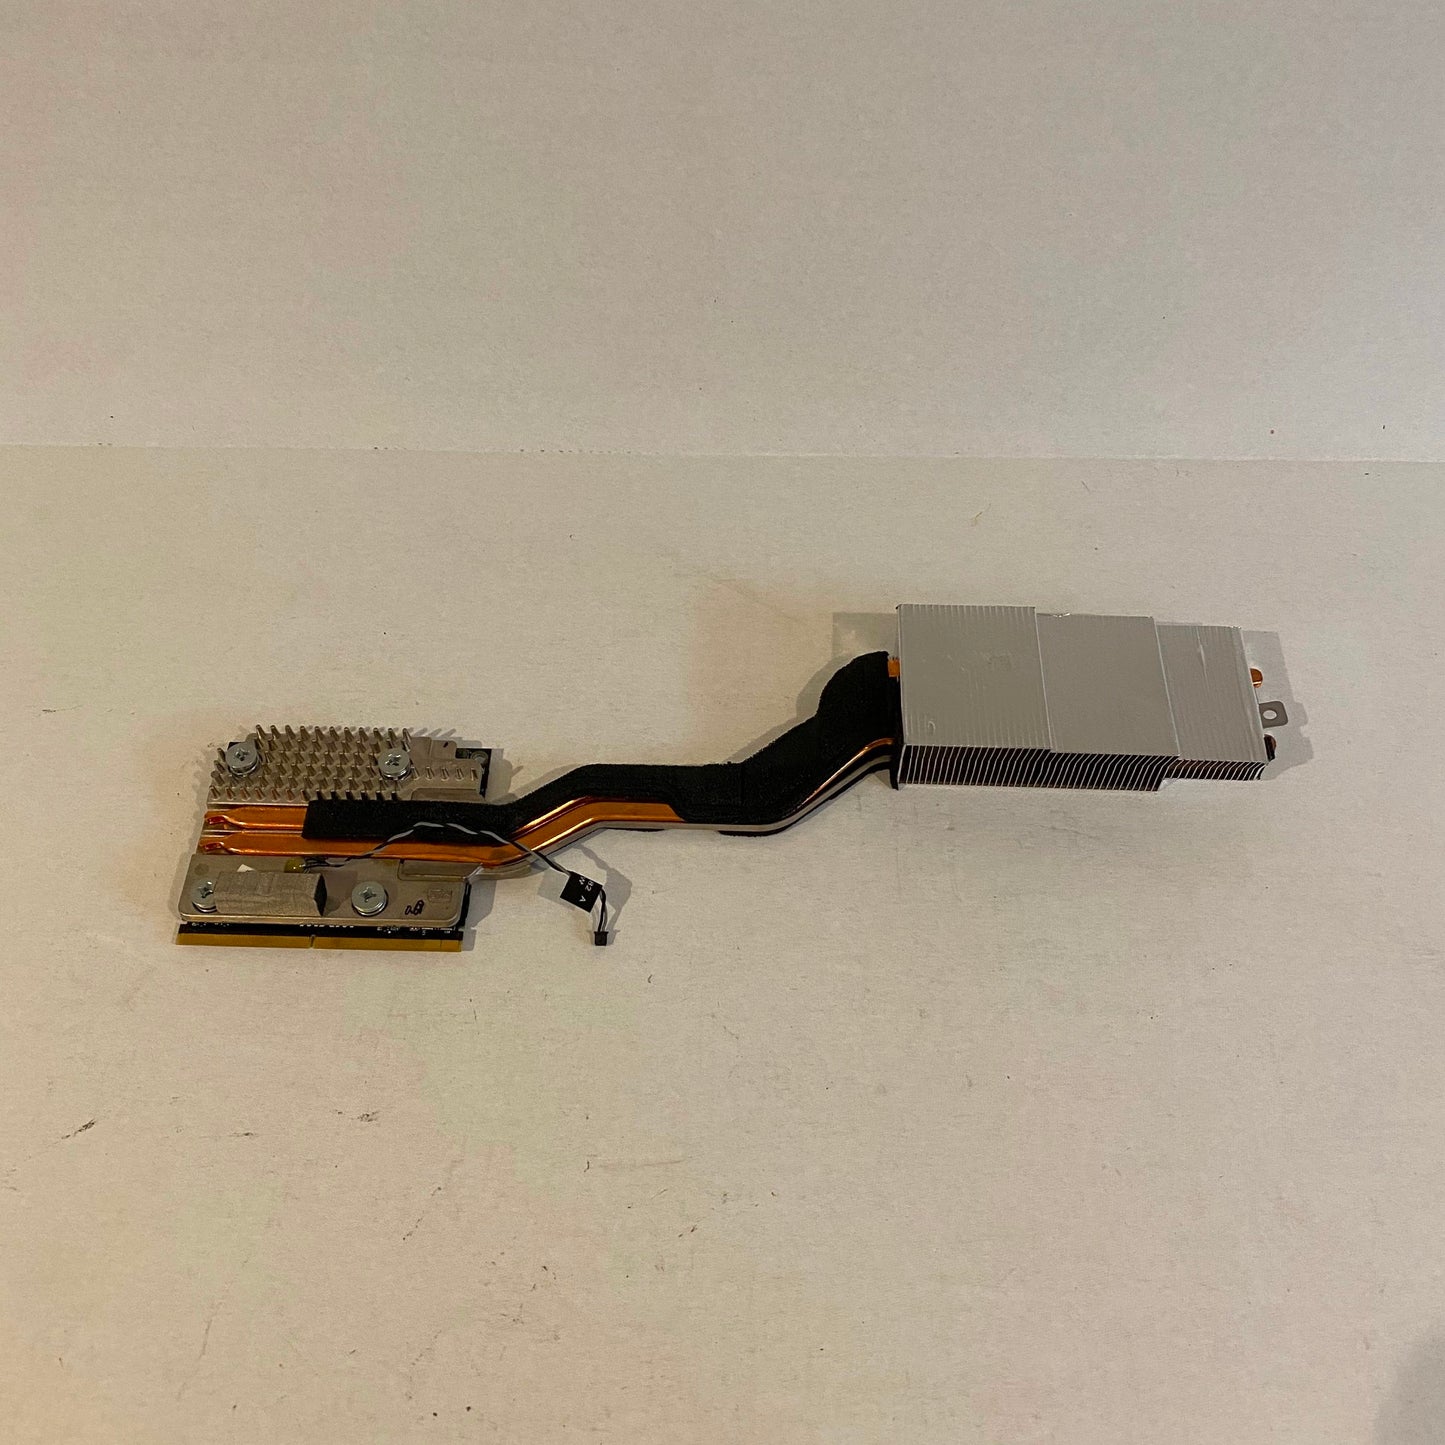 Nvidia GeForce GT120 256MB Video Card for 24" Apple iMac - 661-4991